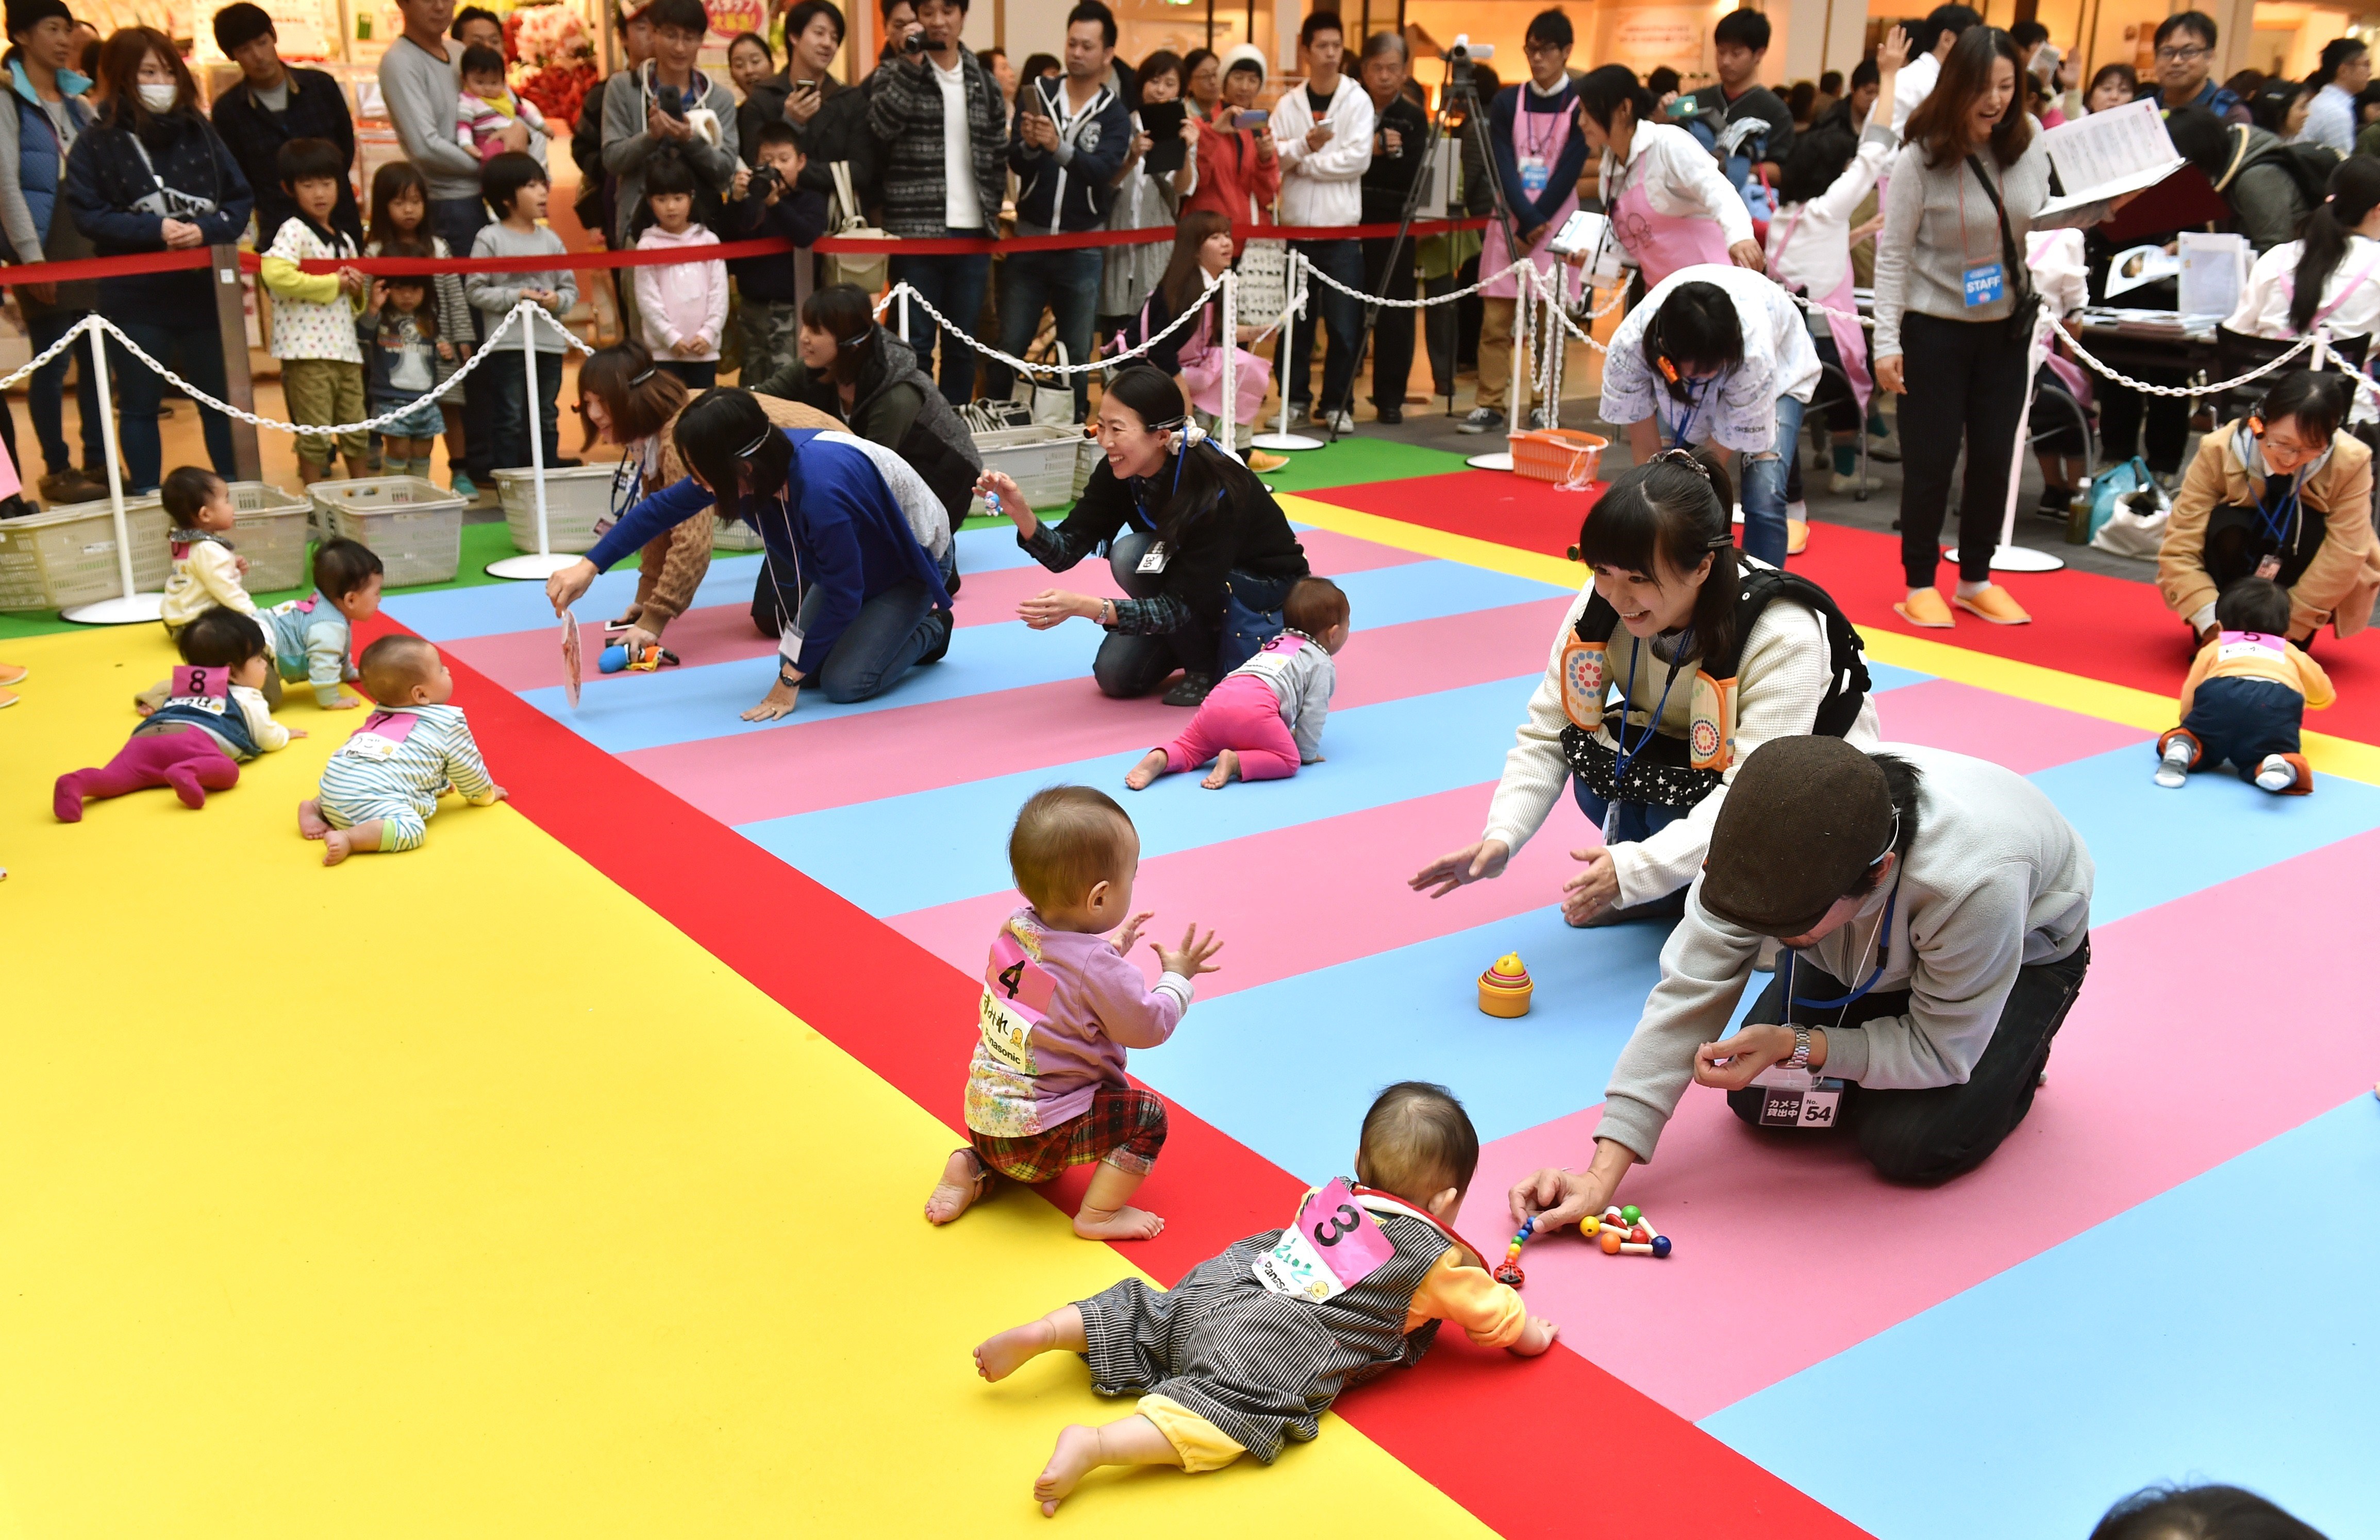 Babies compete in a baby crawling competition hosted by a Japanese magazine that specializes in pregnancy, childbirth and child-rearing, in Yokohama, Kanagawa on Nov. 23, 2015. (Kazuhiro Nogi—AFP/Getty Images)